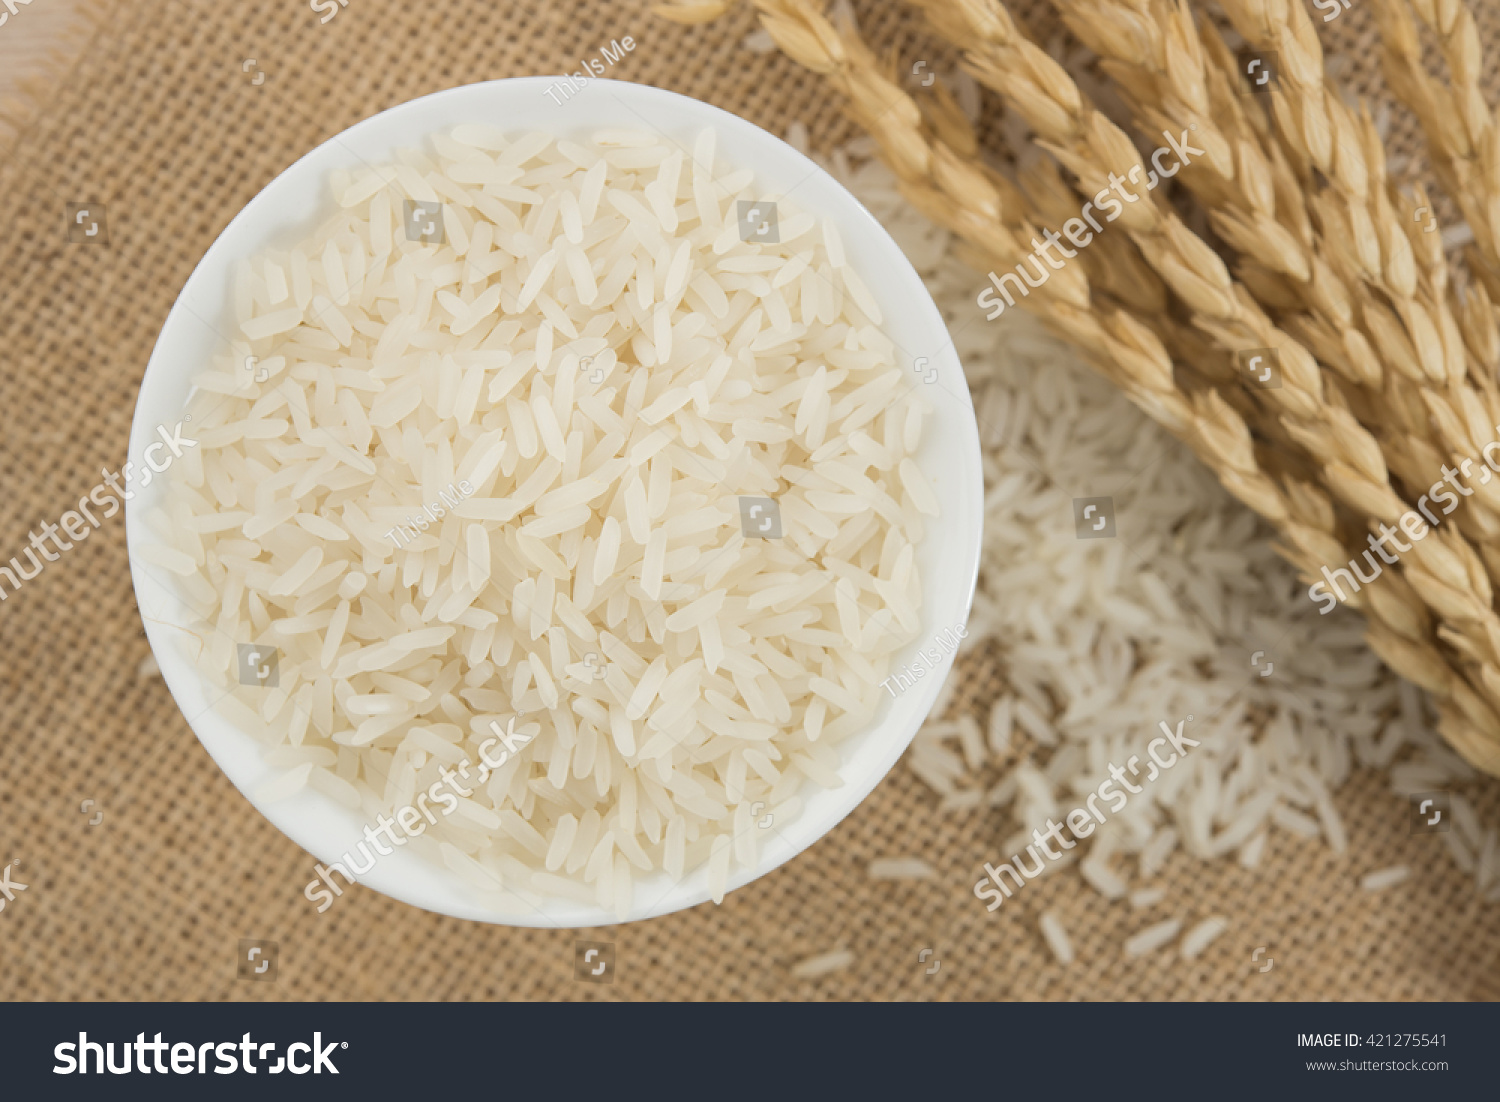 rice grain in white bowl on table. #421275541